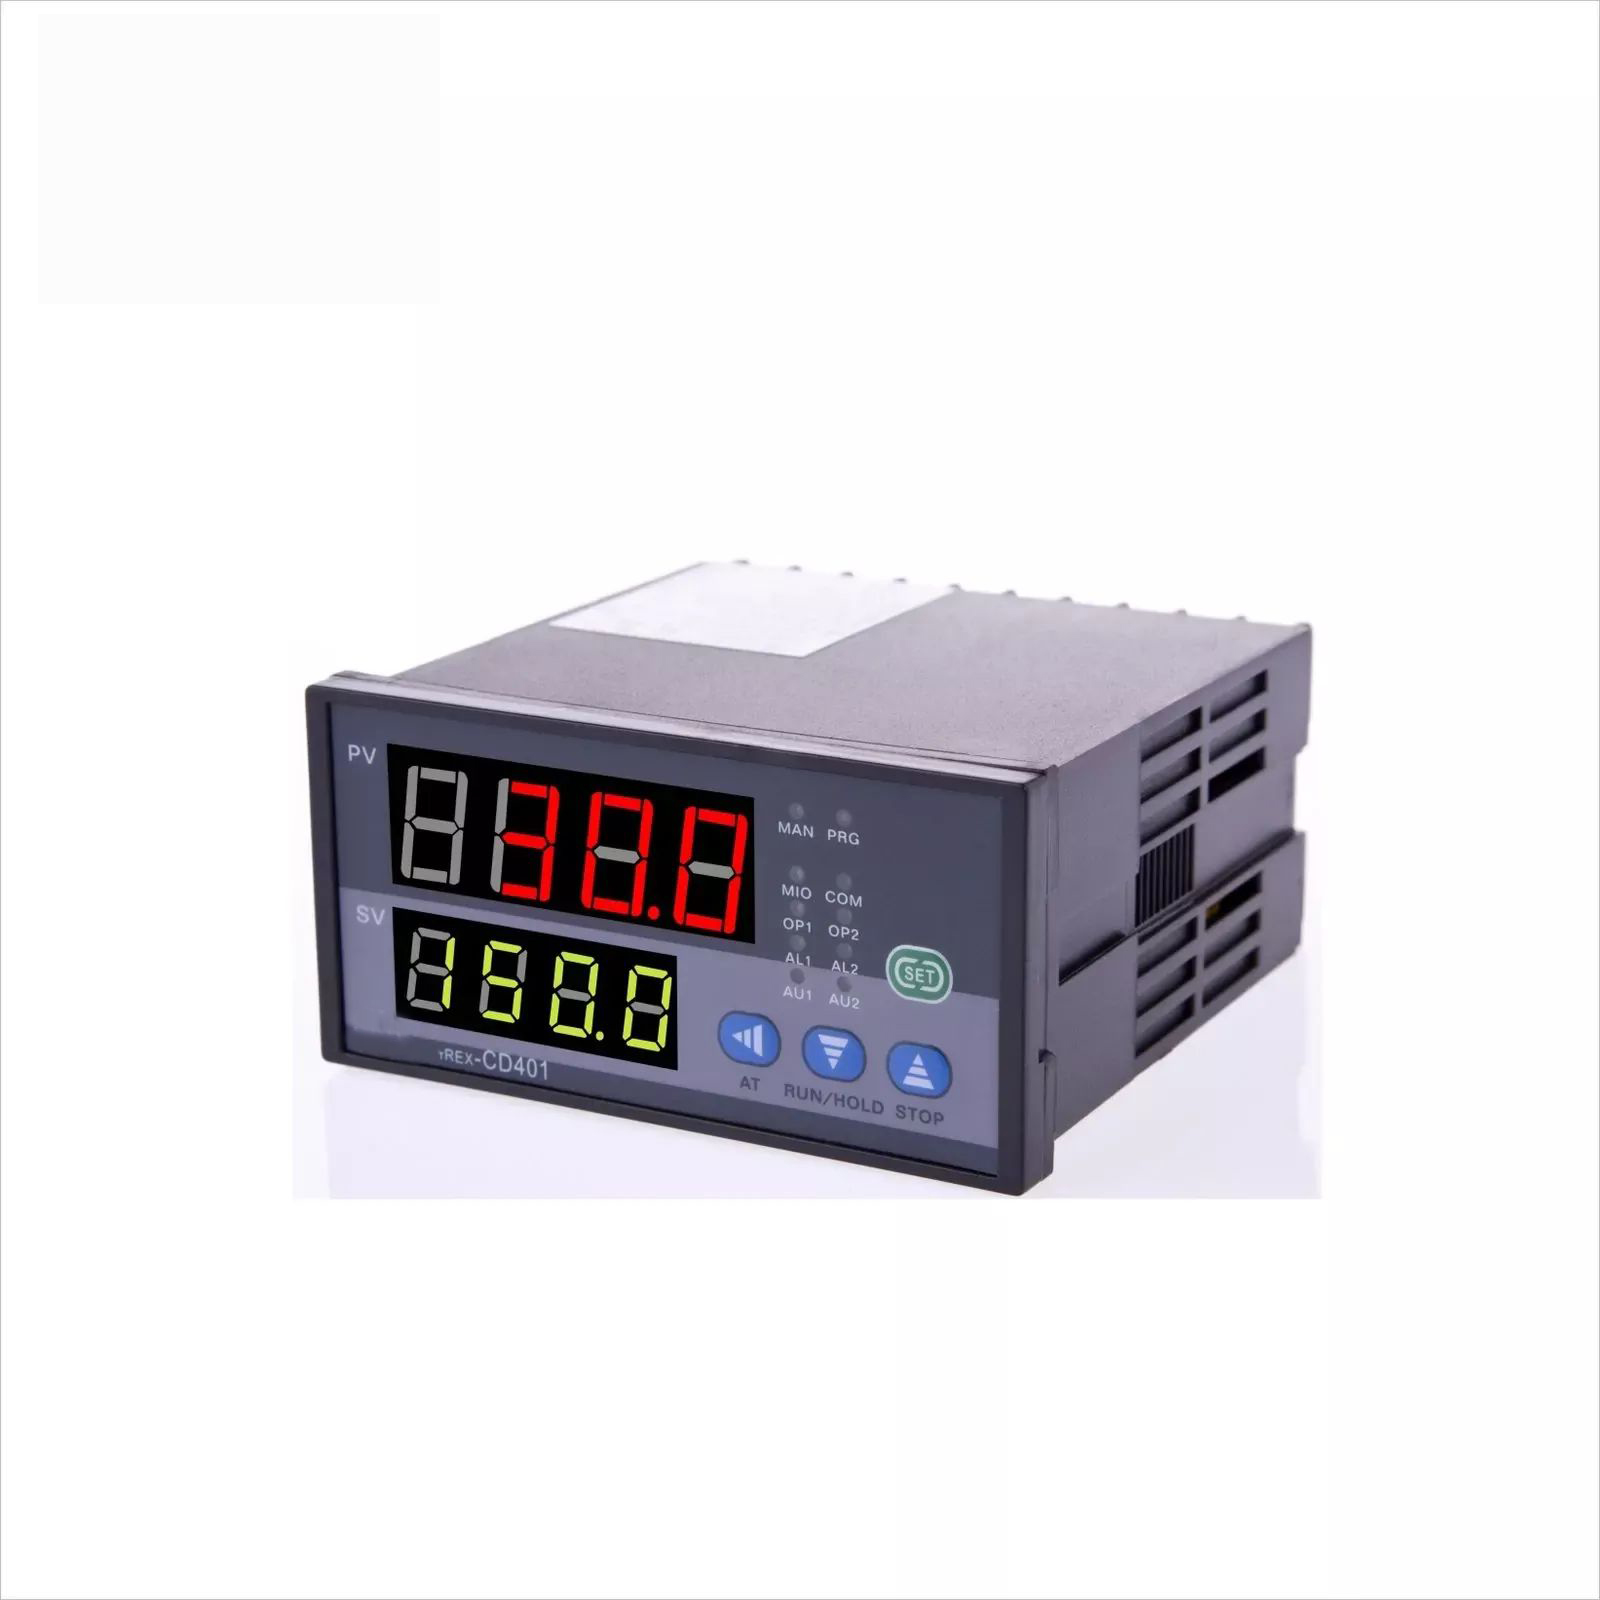 AT908-CD401 10 different output modules and 4-20mA alarm Intelligent temperature PID controller